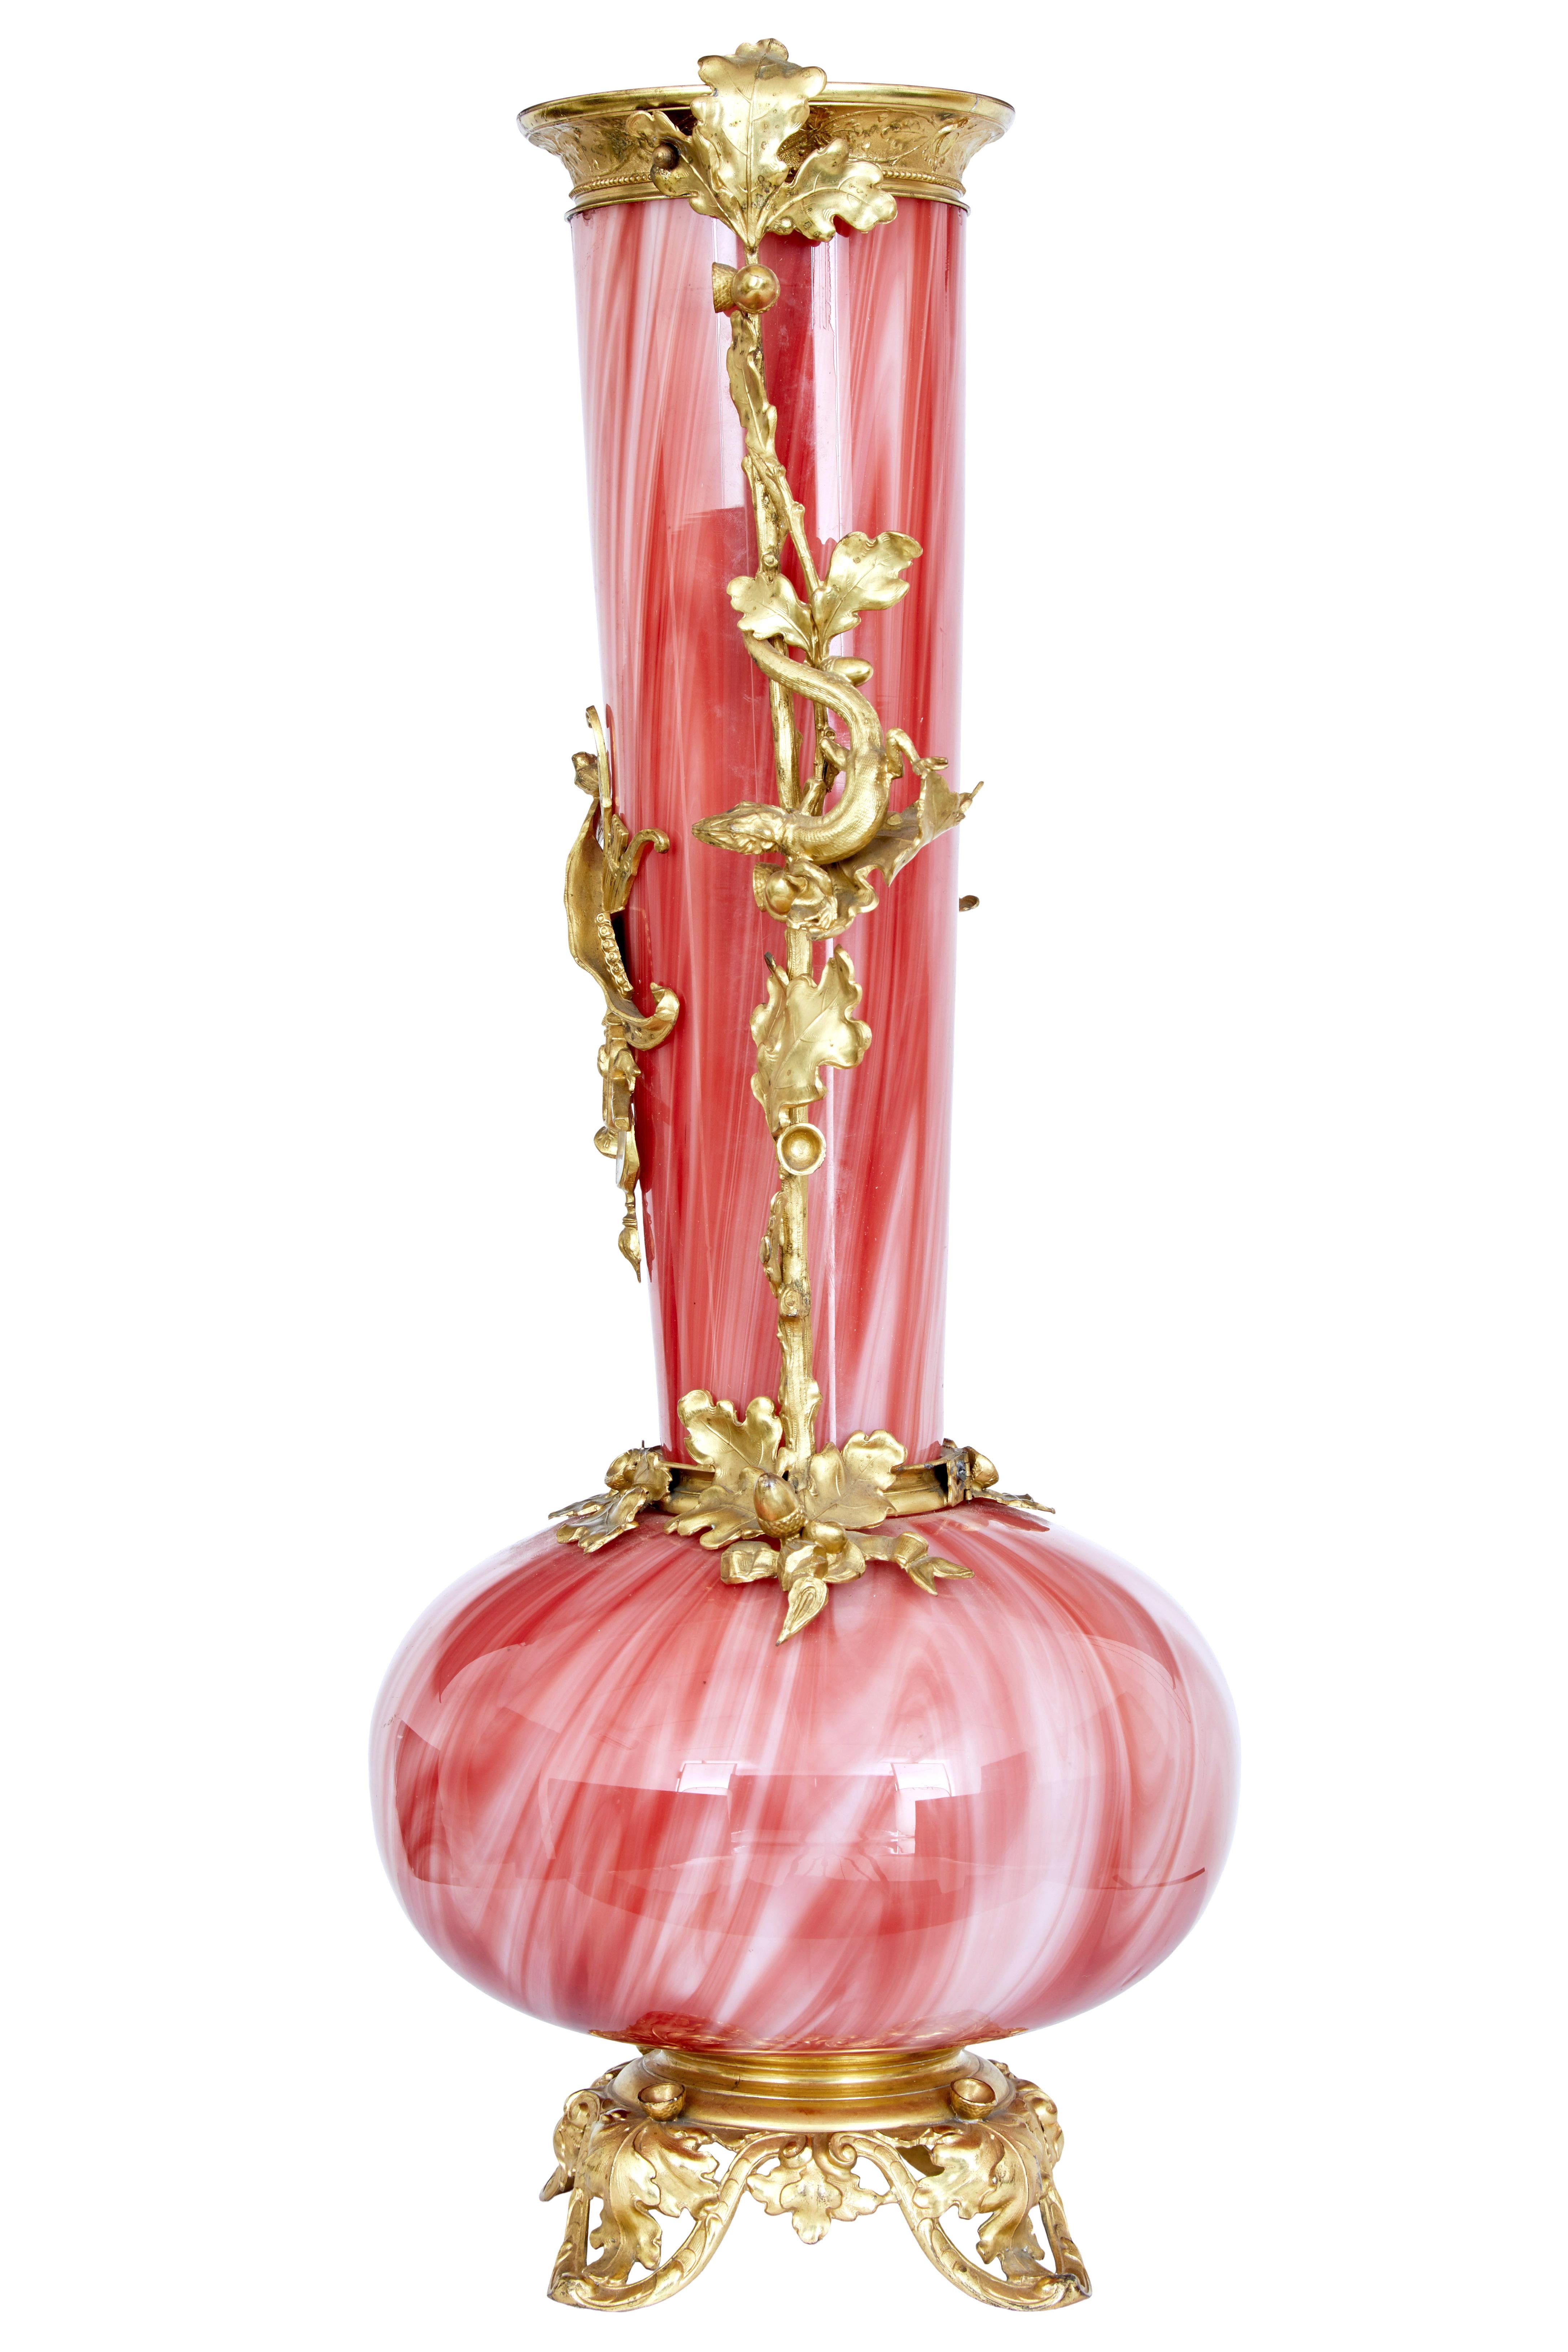 1930's French art glass vase with ormolu mounts circa 1930.

Elegant hand blown art glass of reds and whites, profusely decorated with ormolu mounts to the rim, top and base.   Decorated with acorns and oak leaves down the stem with musical themed